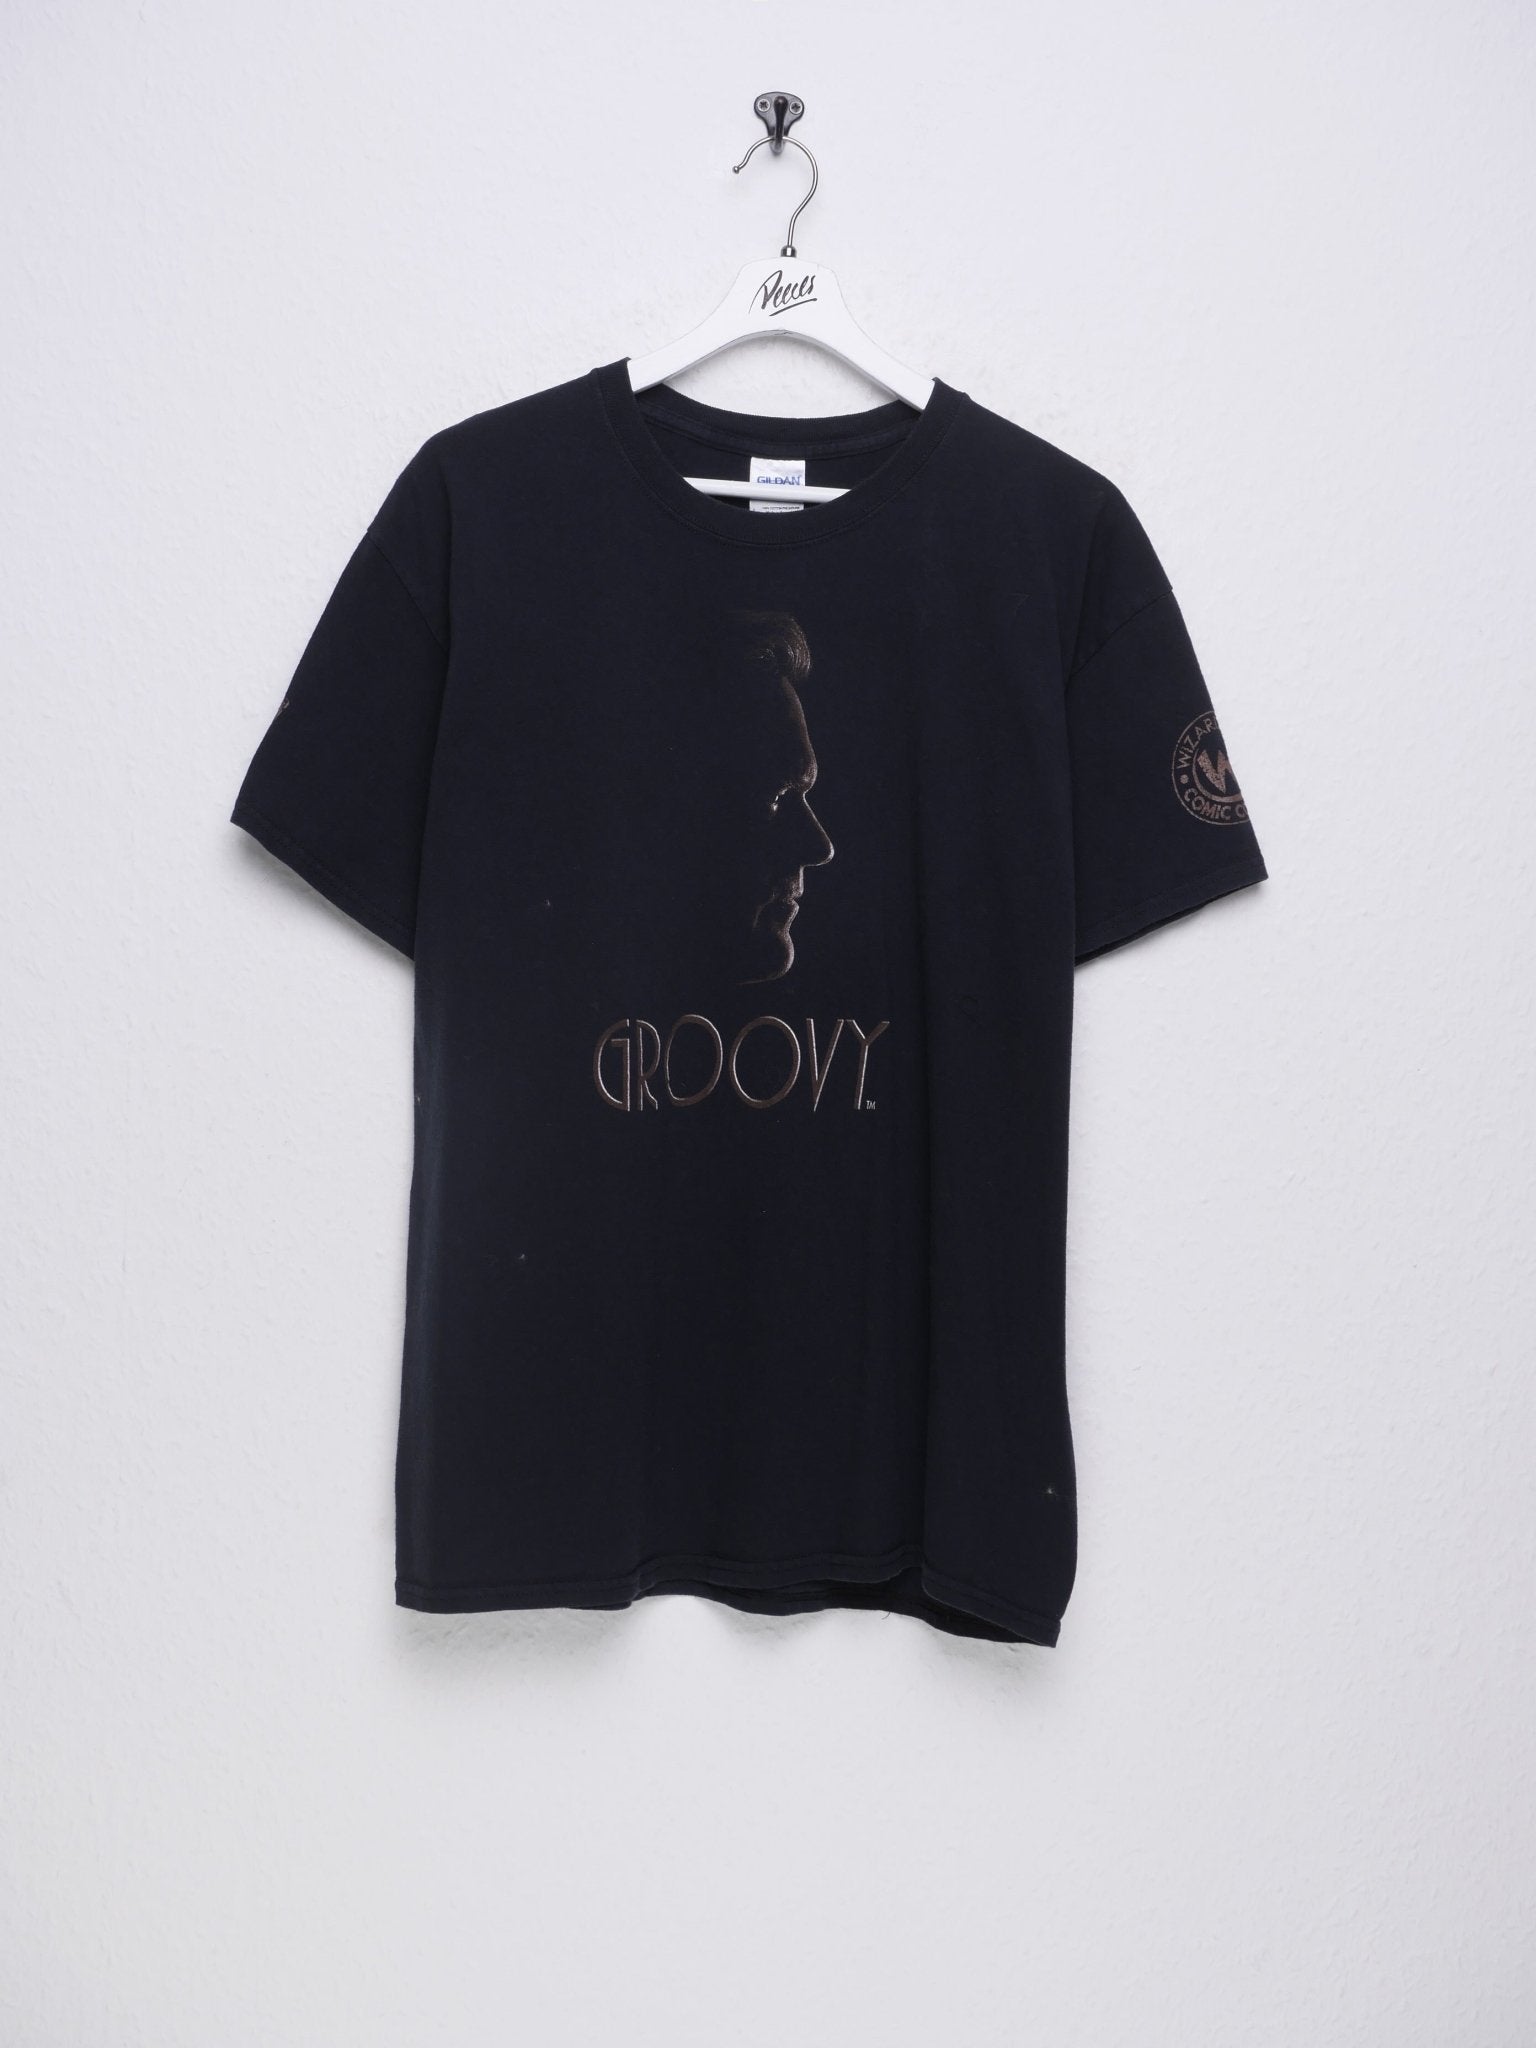 printed Groovy face Graphic black Shirt - Peeces